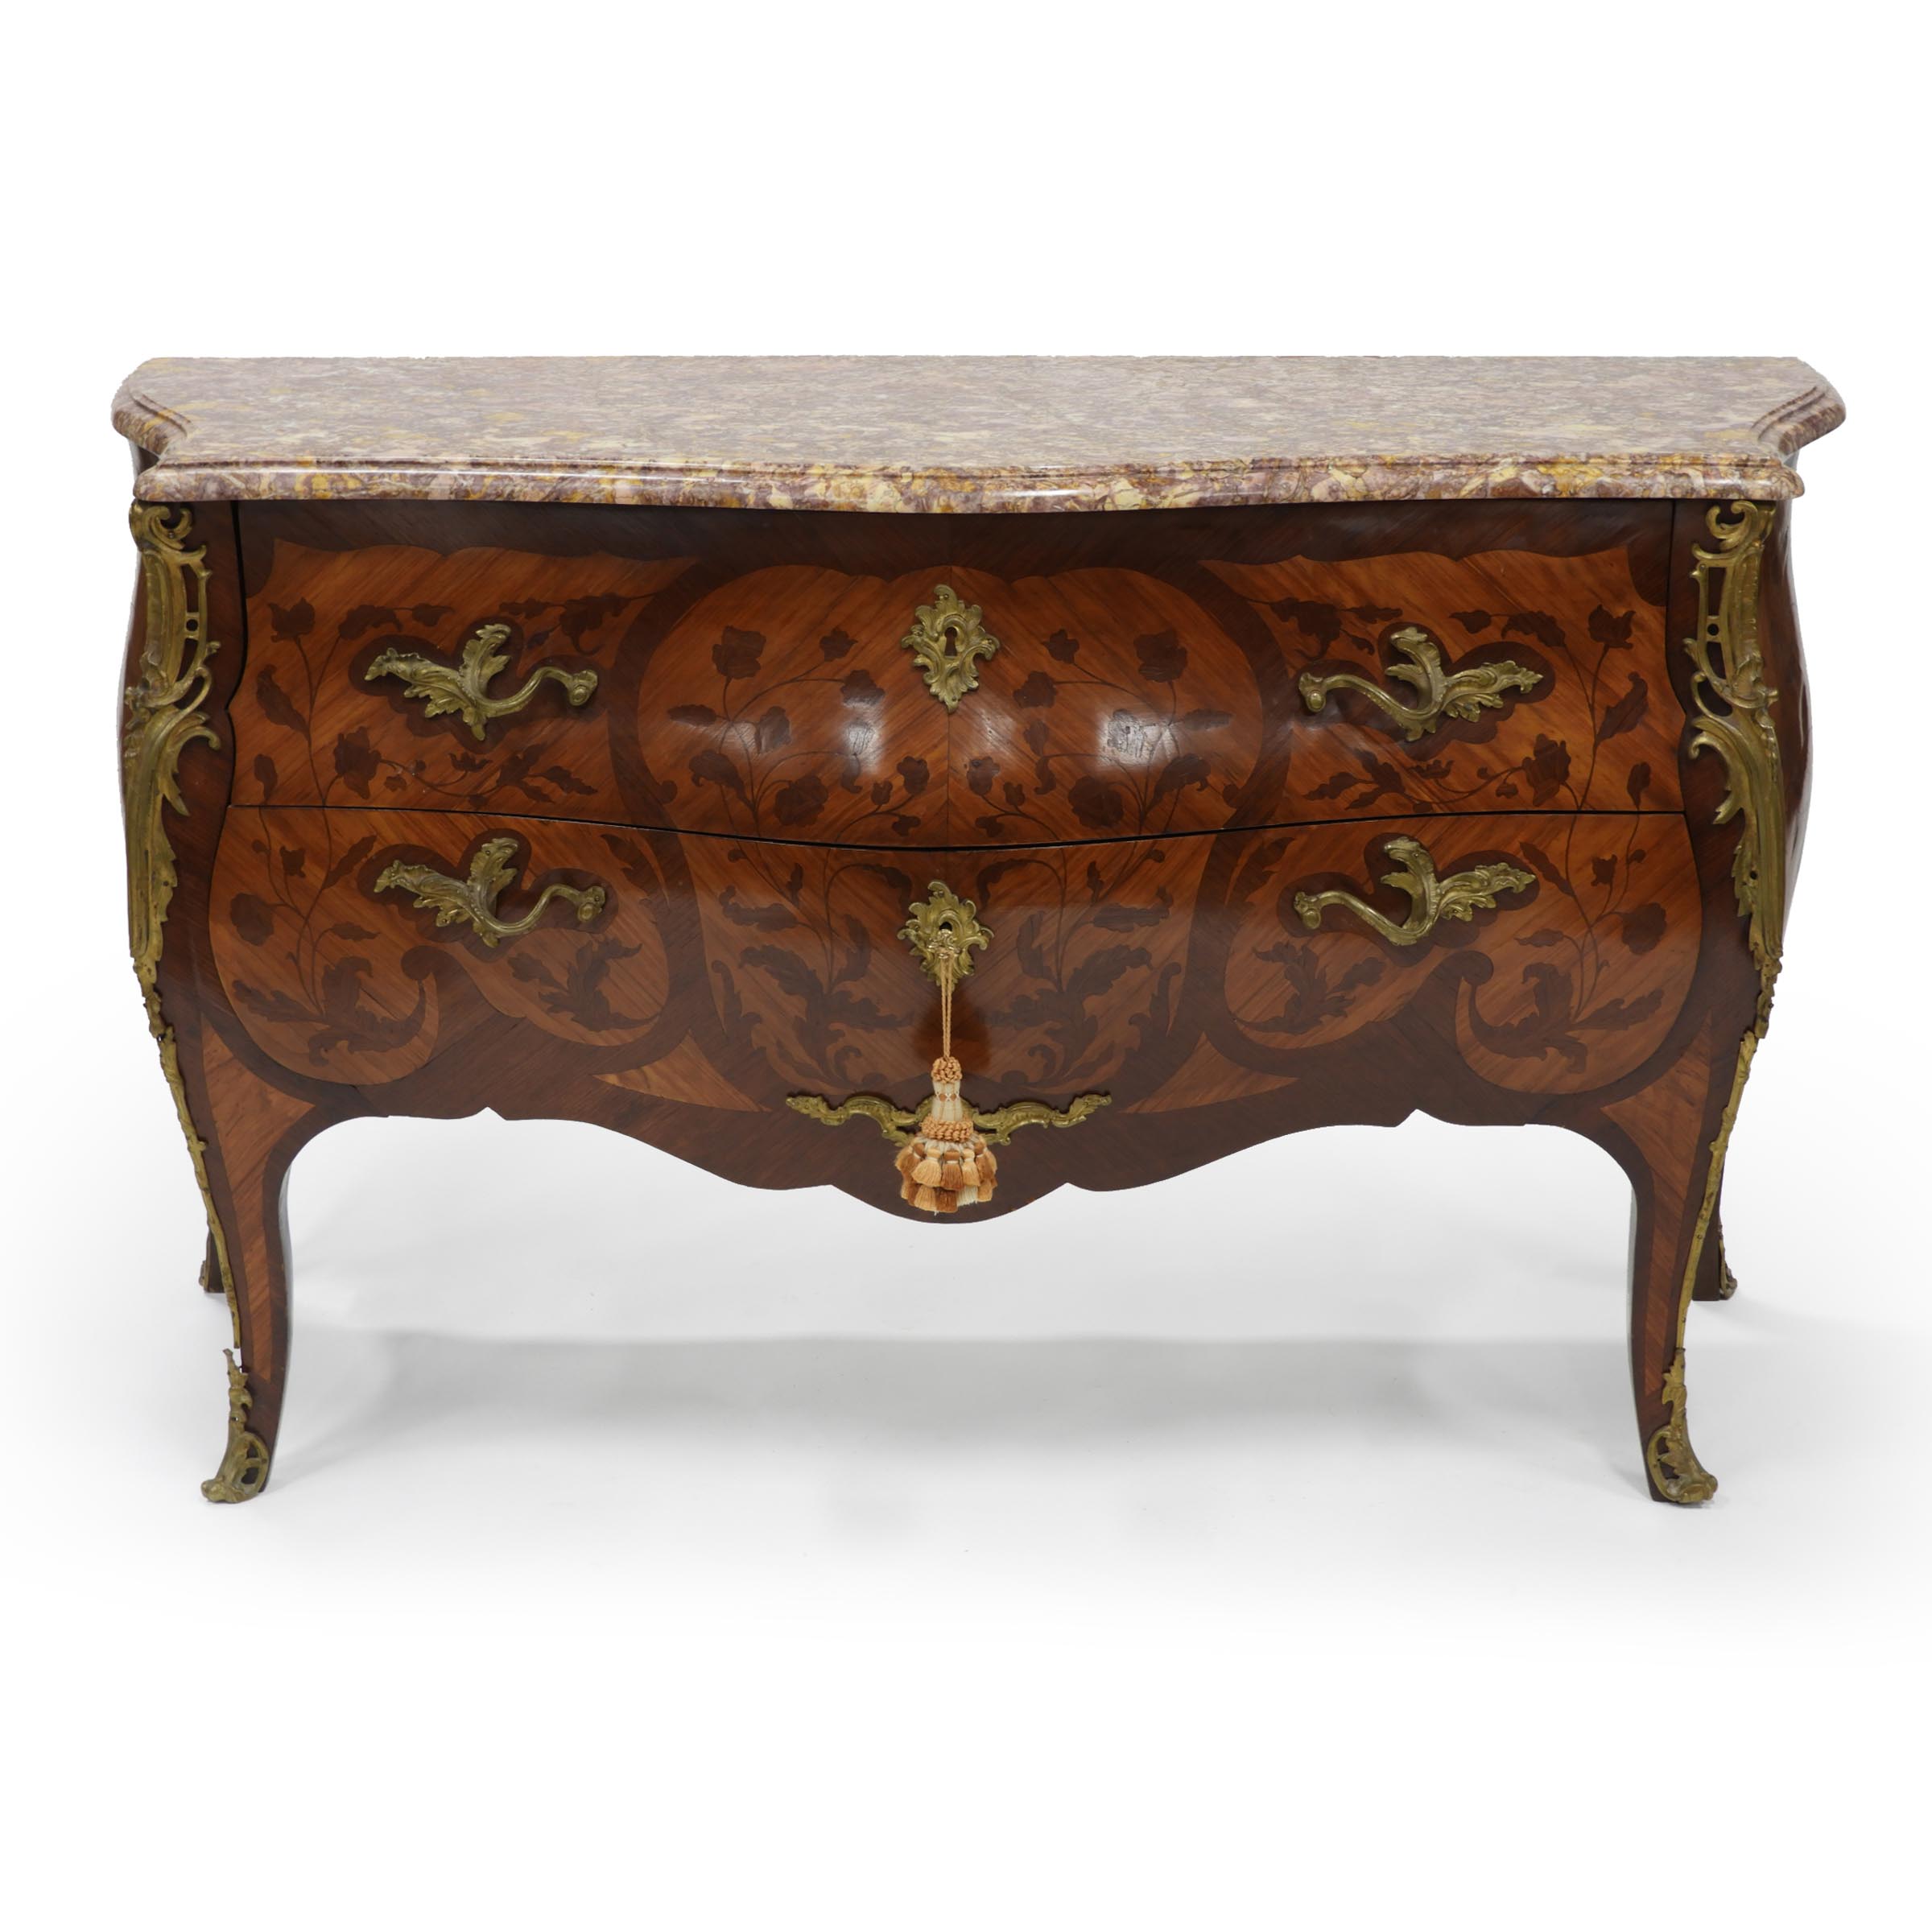 French Ormolu Mounted Inlaid Parquetry Bombé Commode on Stand, c.1900